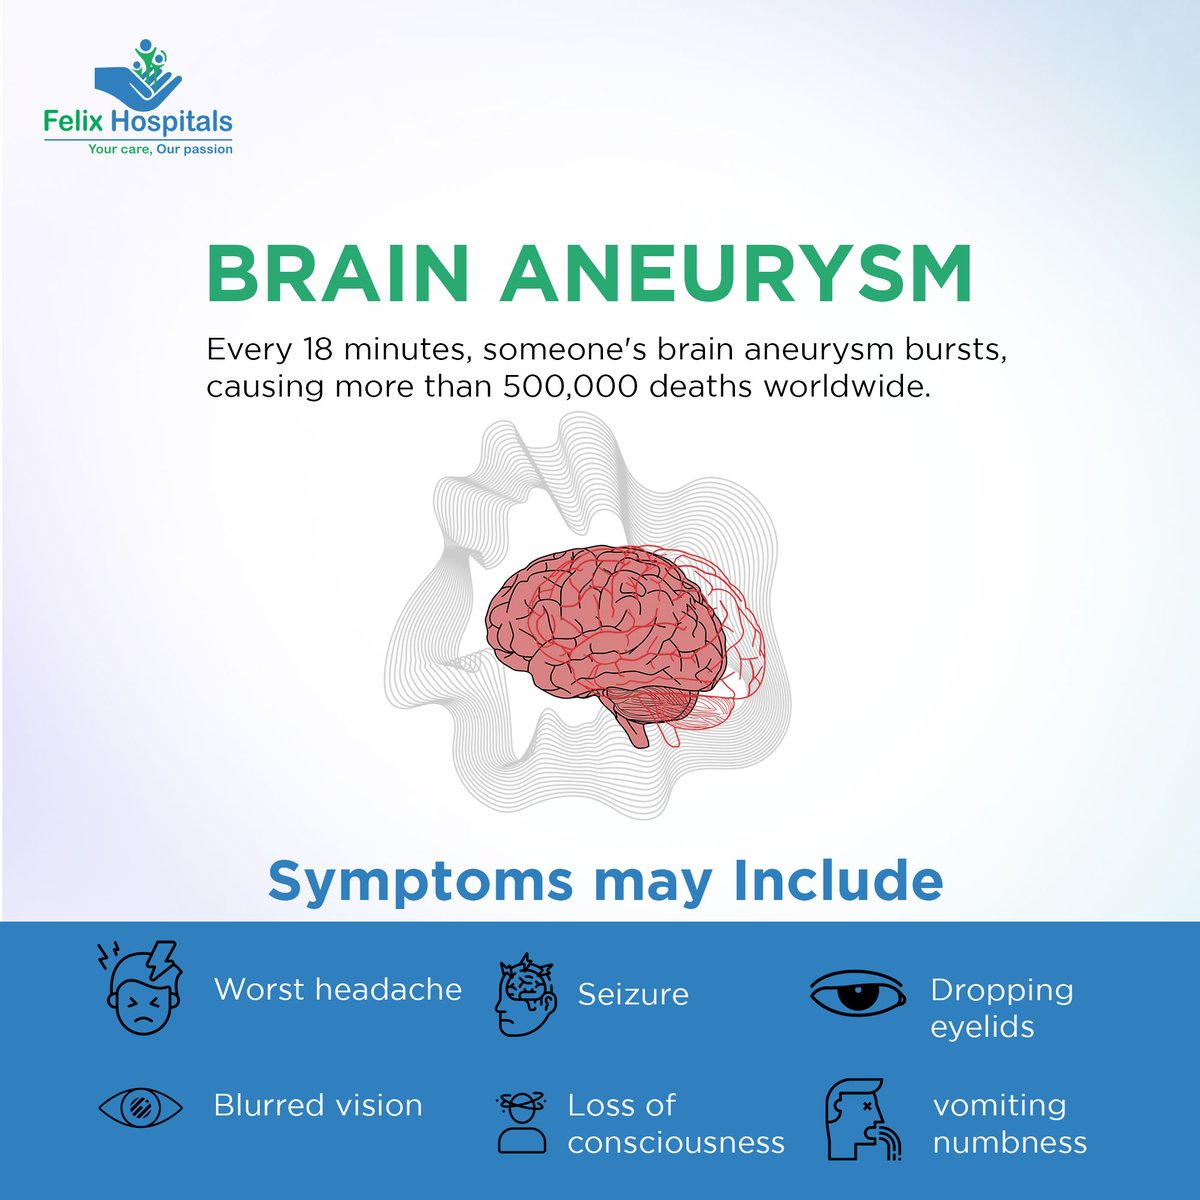 If you see these symptoms, get help ASAP. Early treatment for brain aneurysms saves lives. Spread the word, get check-ups, and protect your loved ones. #EarlyDetectionSavesLives #brain #Aneurysm #seizures #hospital #exploremore #besthospitalinnoida #hospitalnearme